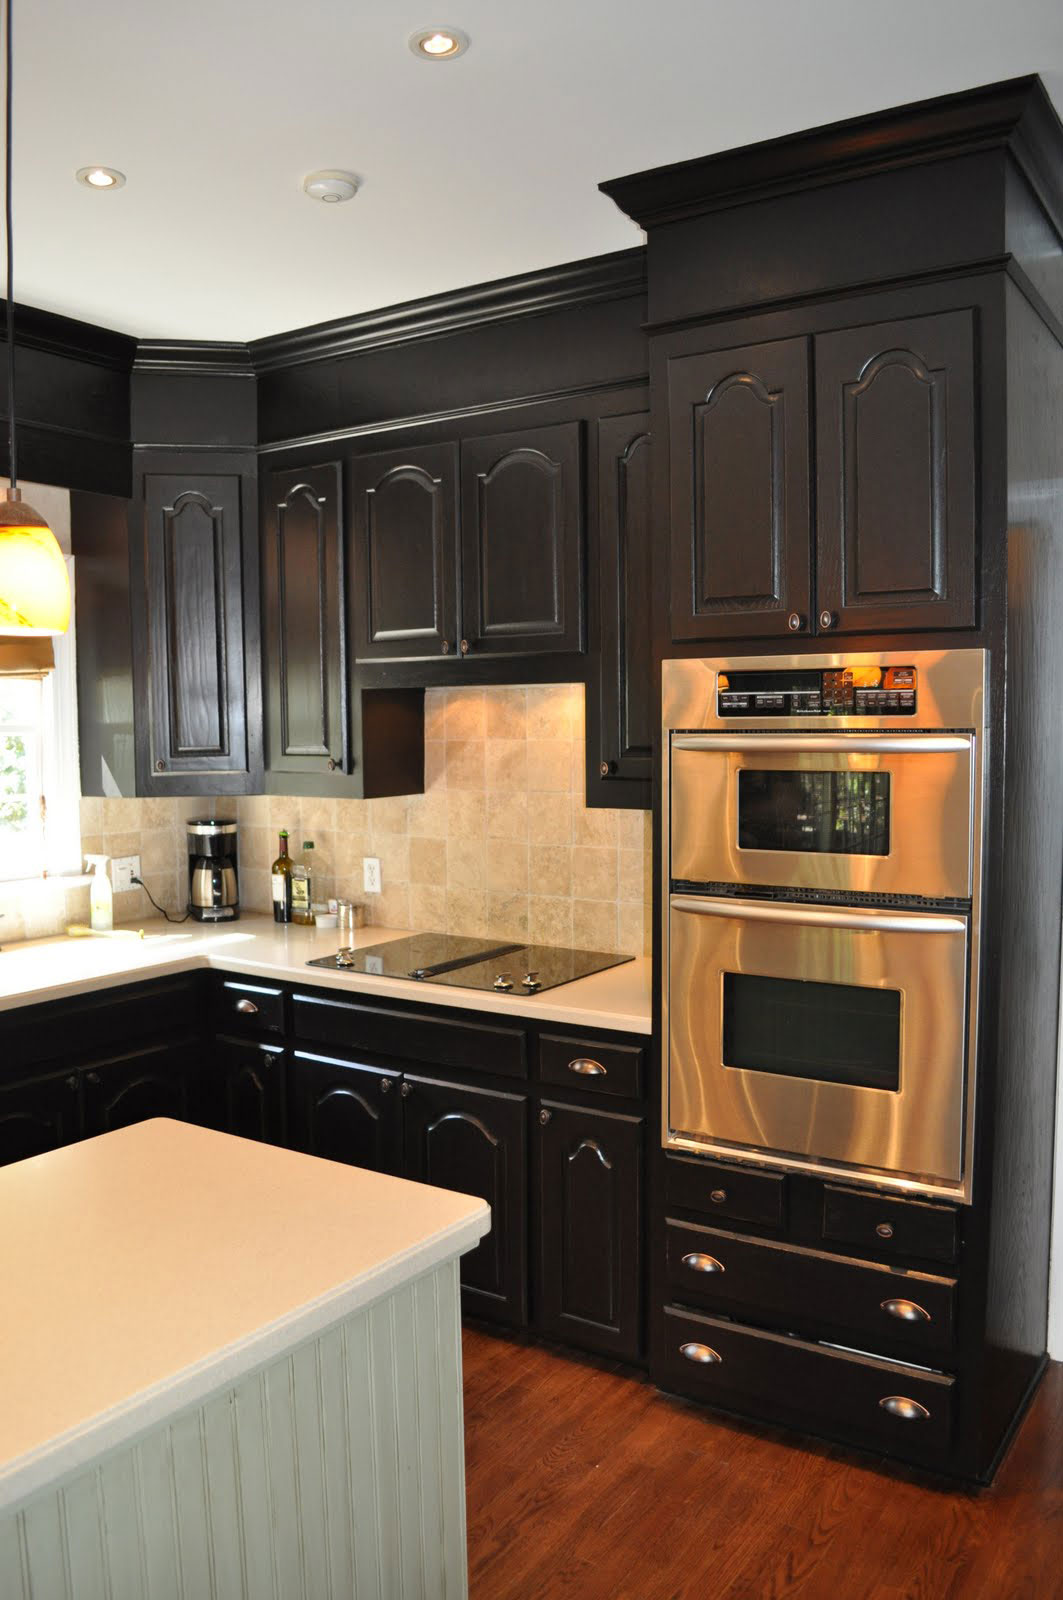 Get An Elegant Look With Black Kitchen Cabinets